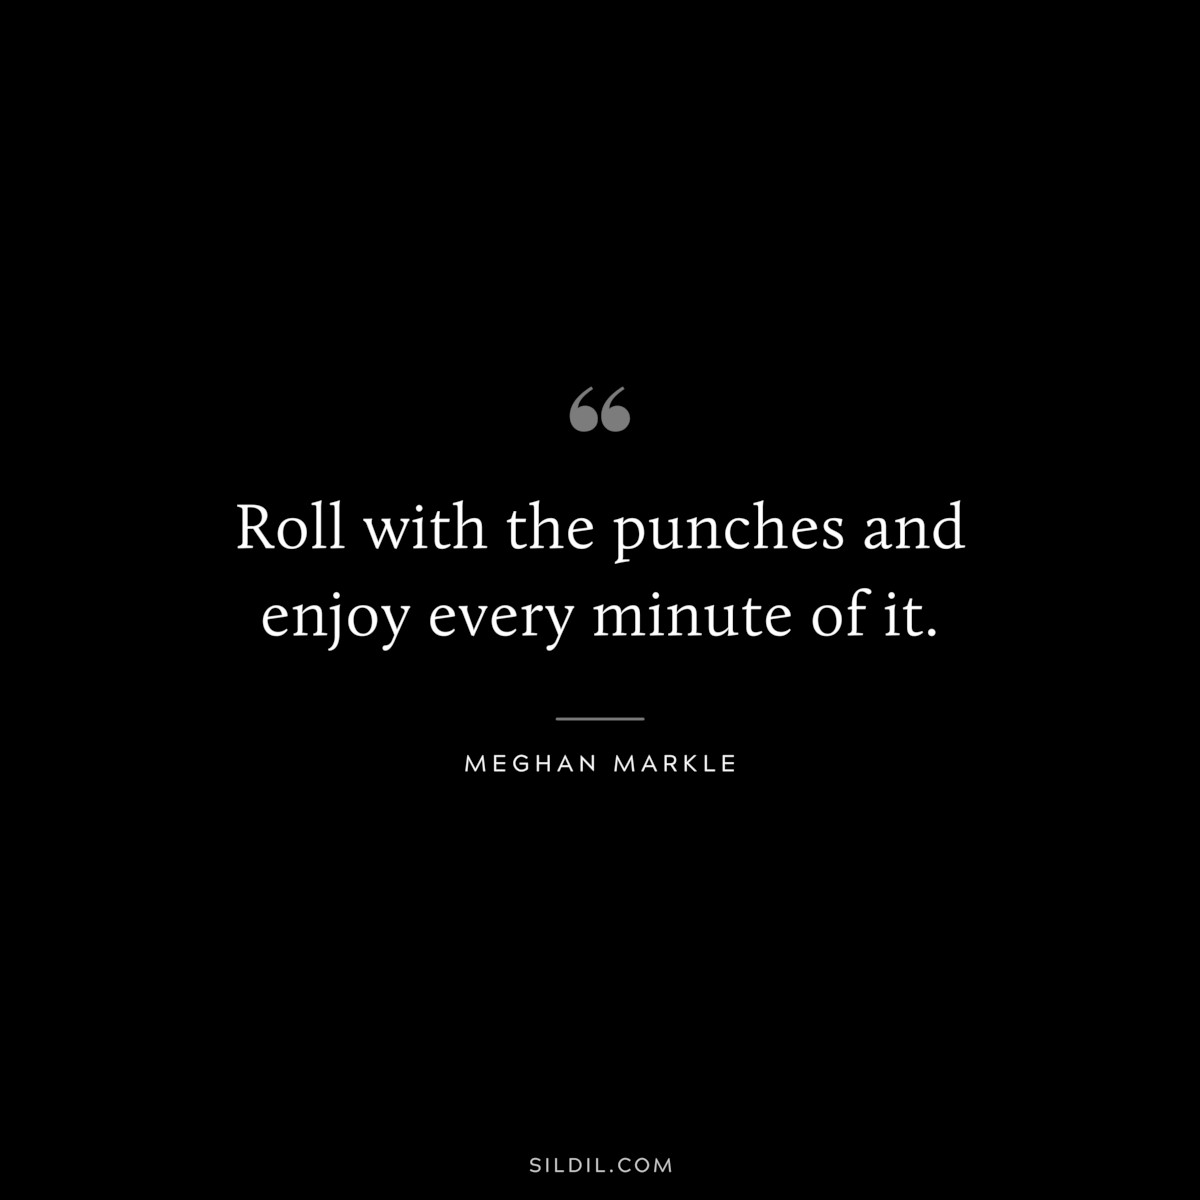 Roll with the punches and enjoy every minute of it. ― Meghan Markle